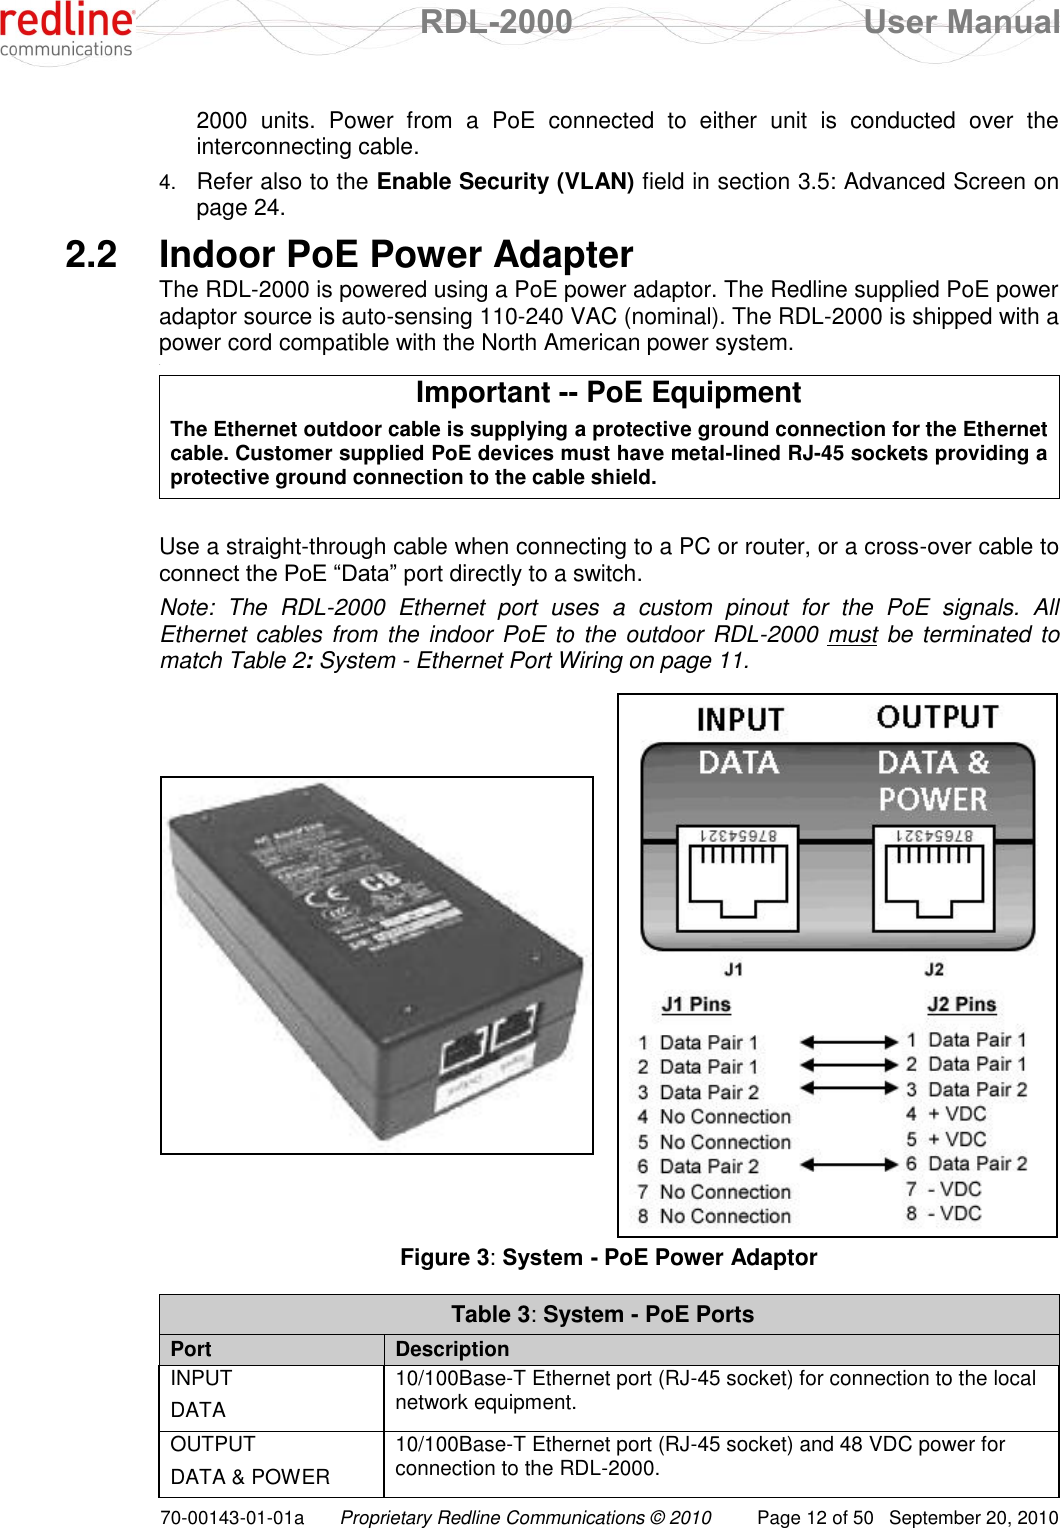  RDL-2000  User Manual 70-00143-01-01a Proprietary Redline Communications © 2010  Page 12 of 50  September 20, 2010 2000  units.  Power  from  a  PoE  connected  to  either  unit  is  conducted  over  the interconnecting cable.  4. Refer also to the Enable Security (VLAN) field in section 3.5: Advanced Screen on page 24. 2.2  Indoor PoE Power Adapter The RDL-2000 is powered using a PoE power adaptor. The Redline supplied PoE power adaptor source is auto-sensing 110-240 VAC (nominal). The RDL-2000 is shipped with a power cord compatible with the North American power system. &lt; Important -- PoE Equipment The Ethernet outdoor cable is supplying a protective ground connection for the Ethernet cable. Customer supplied PoE devices must have metal-lined RJ-45 sockets providing a protective ground connection to the cable shield.  Use a straight-through cable when connecting to a PC or router, or a cross-over cable to connect the PoE “Data” port directly to a switch.  Note:  The  RDL-2000  Ethernet  port  uses  a  custom  pinout  for  the  PoE  signals.  All Ethernet cables from the indoor PoE to the outdoor RDL-2000 must be terminated to match Table 2: System - Ethernet Port Wiring on page 11.    Figure 3: System - PoE Power Adaptor  Table 3: System - PoE Ports  Port Description INPUT DATA 10/100Base-T Ethernet port (RJ-45 socket) for connection to the local network equipment. OUTPUT DATA &amp; POWER  10/100Base-T Ethernet port (RJ-45 socket) and 48 VDC power for connection to the RDL-2000.  